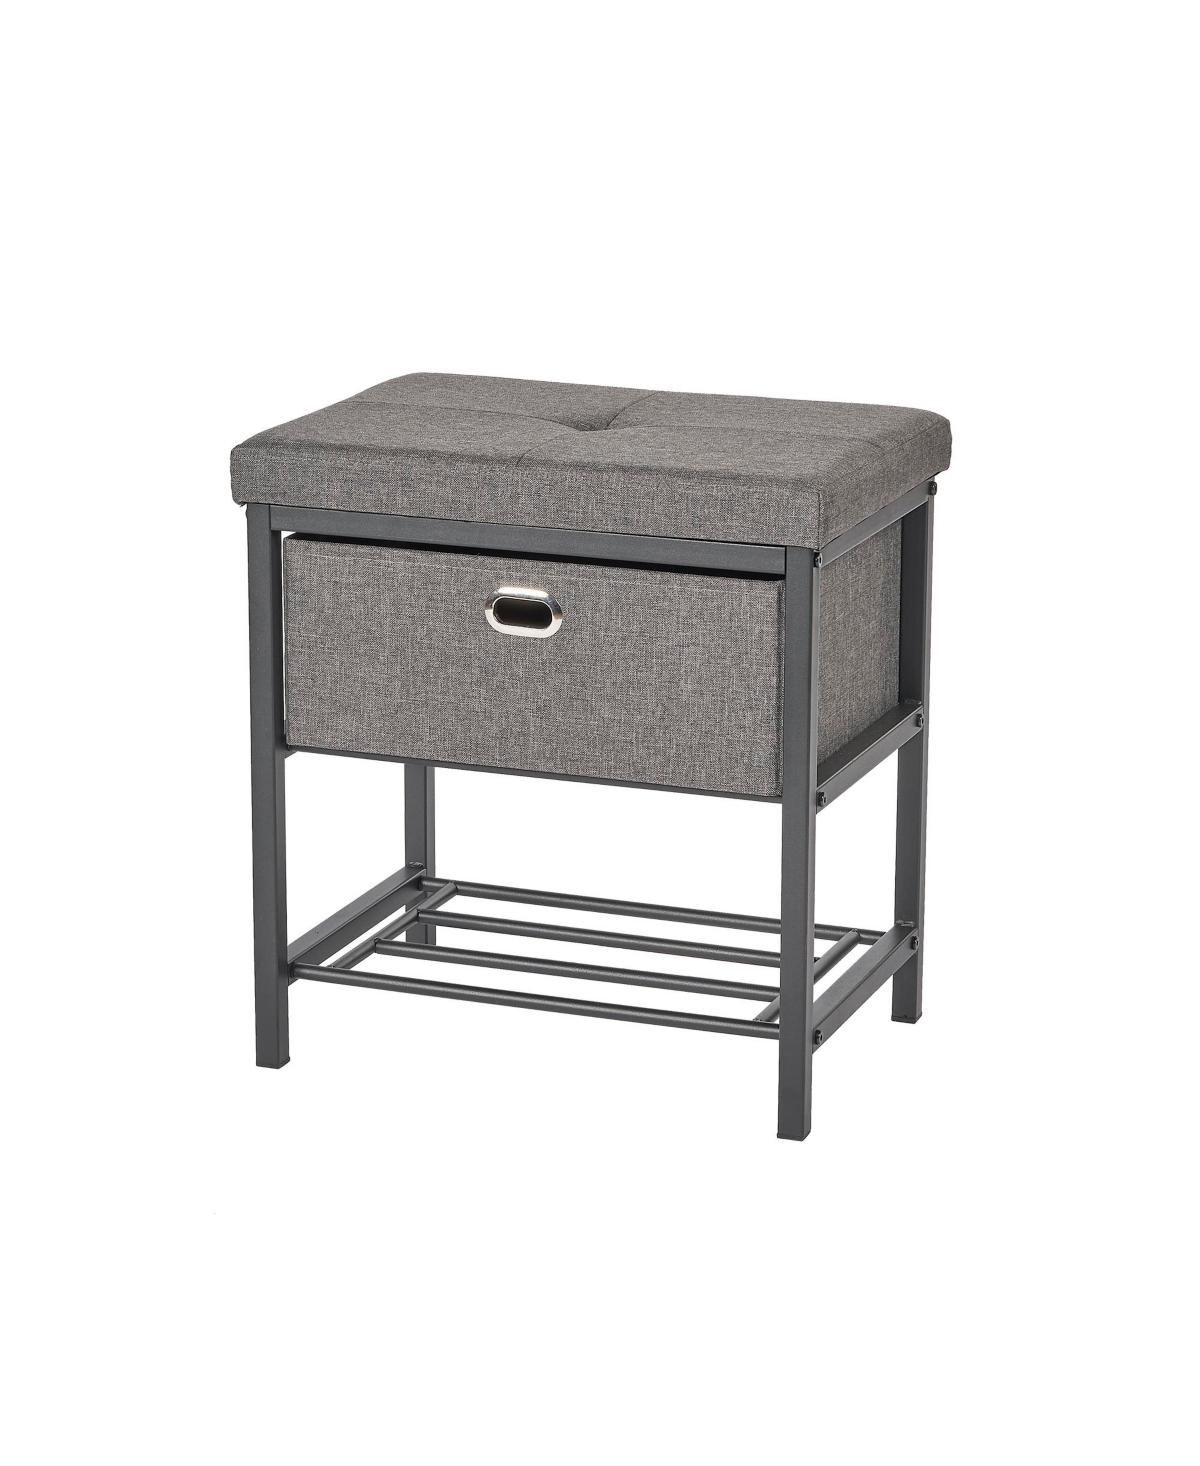 Neatfreak Single Seat Bench With Drawer In Dark Gray Charcoal